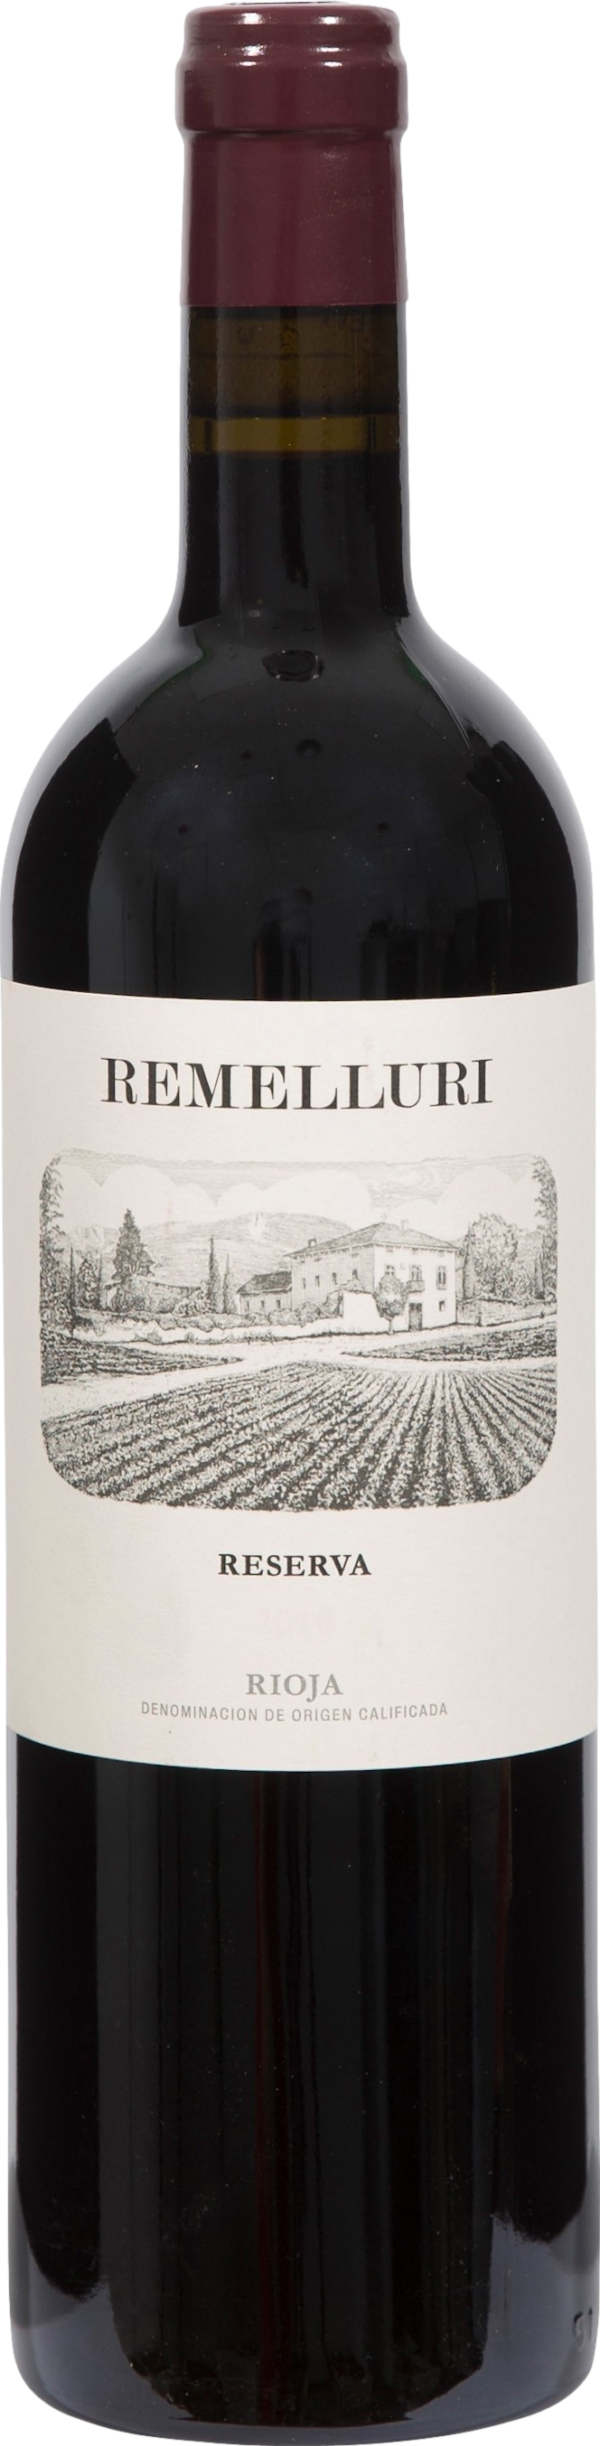 Product image of Remelluri Rioja Reserva 2016 from 8wines